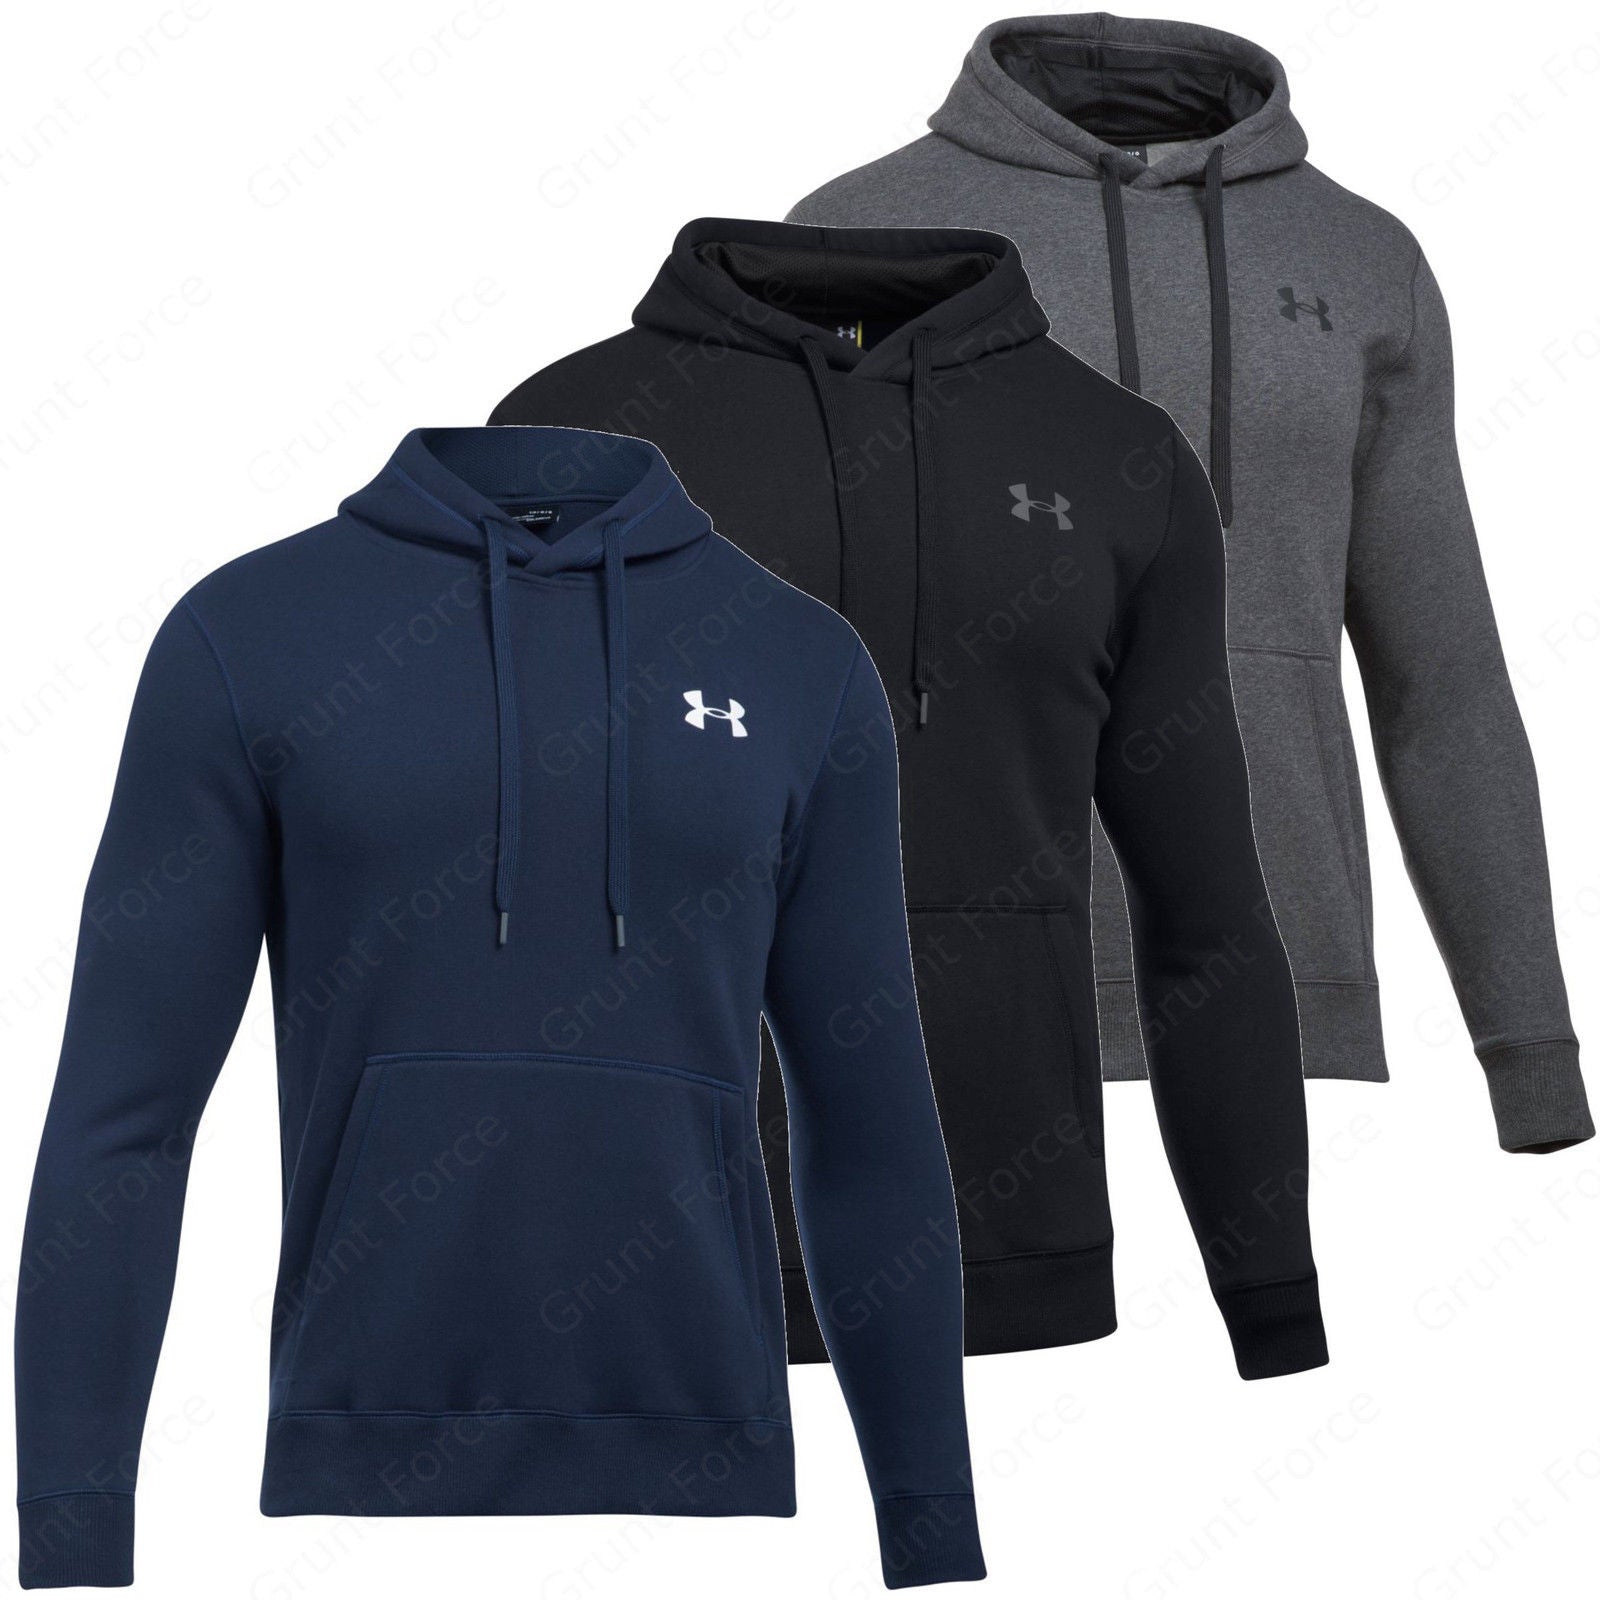 under armour fitted sweatshirt